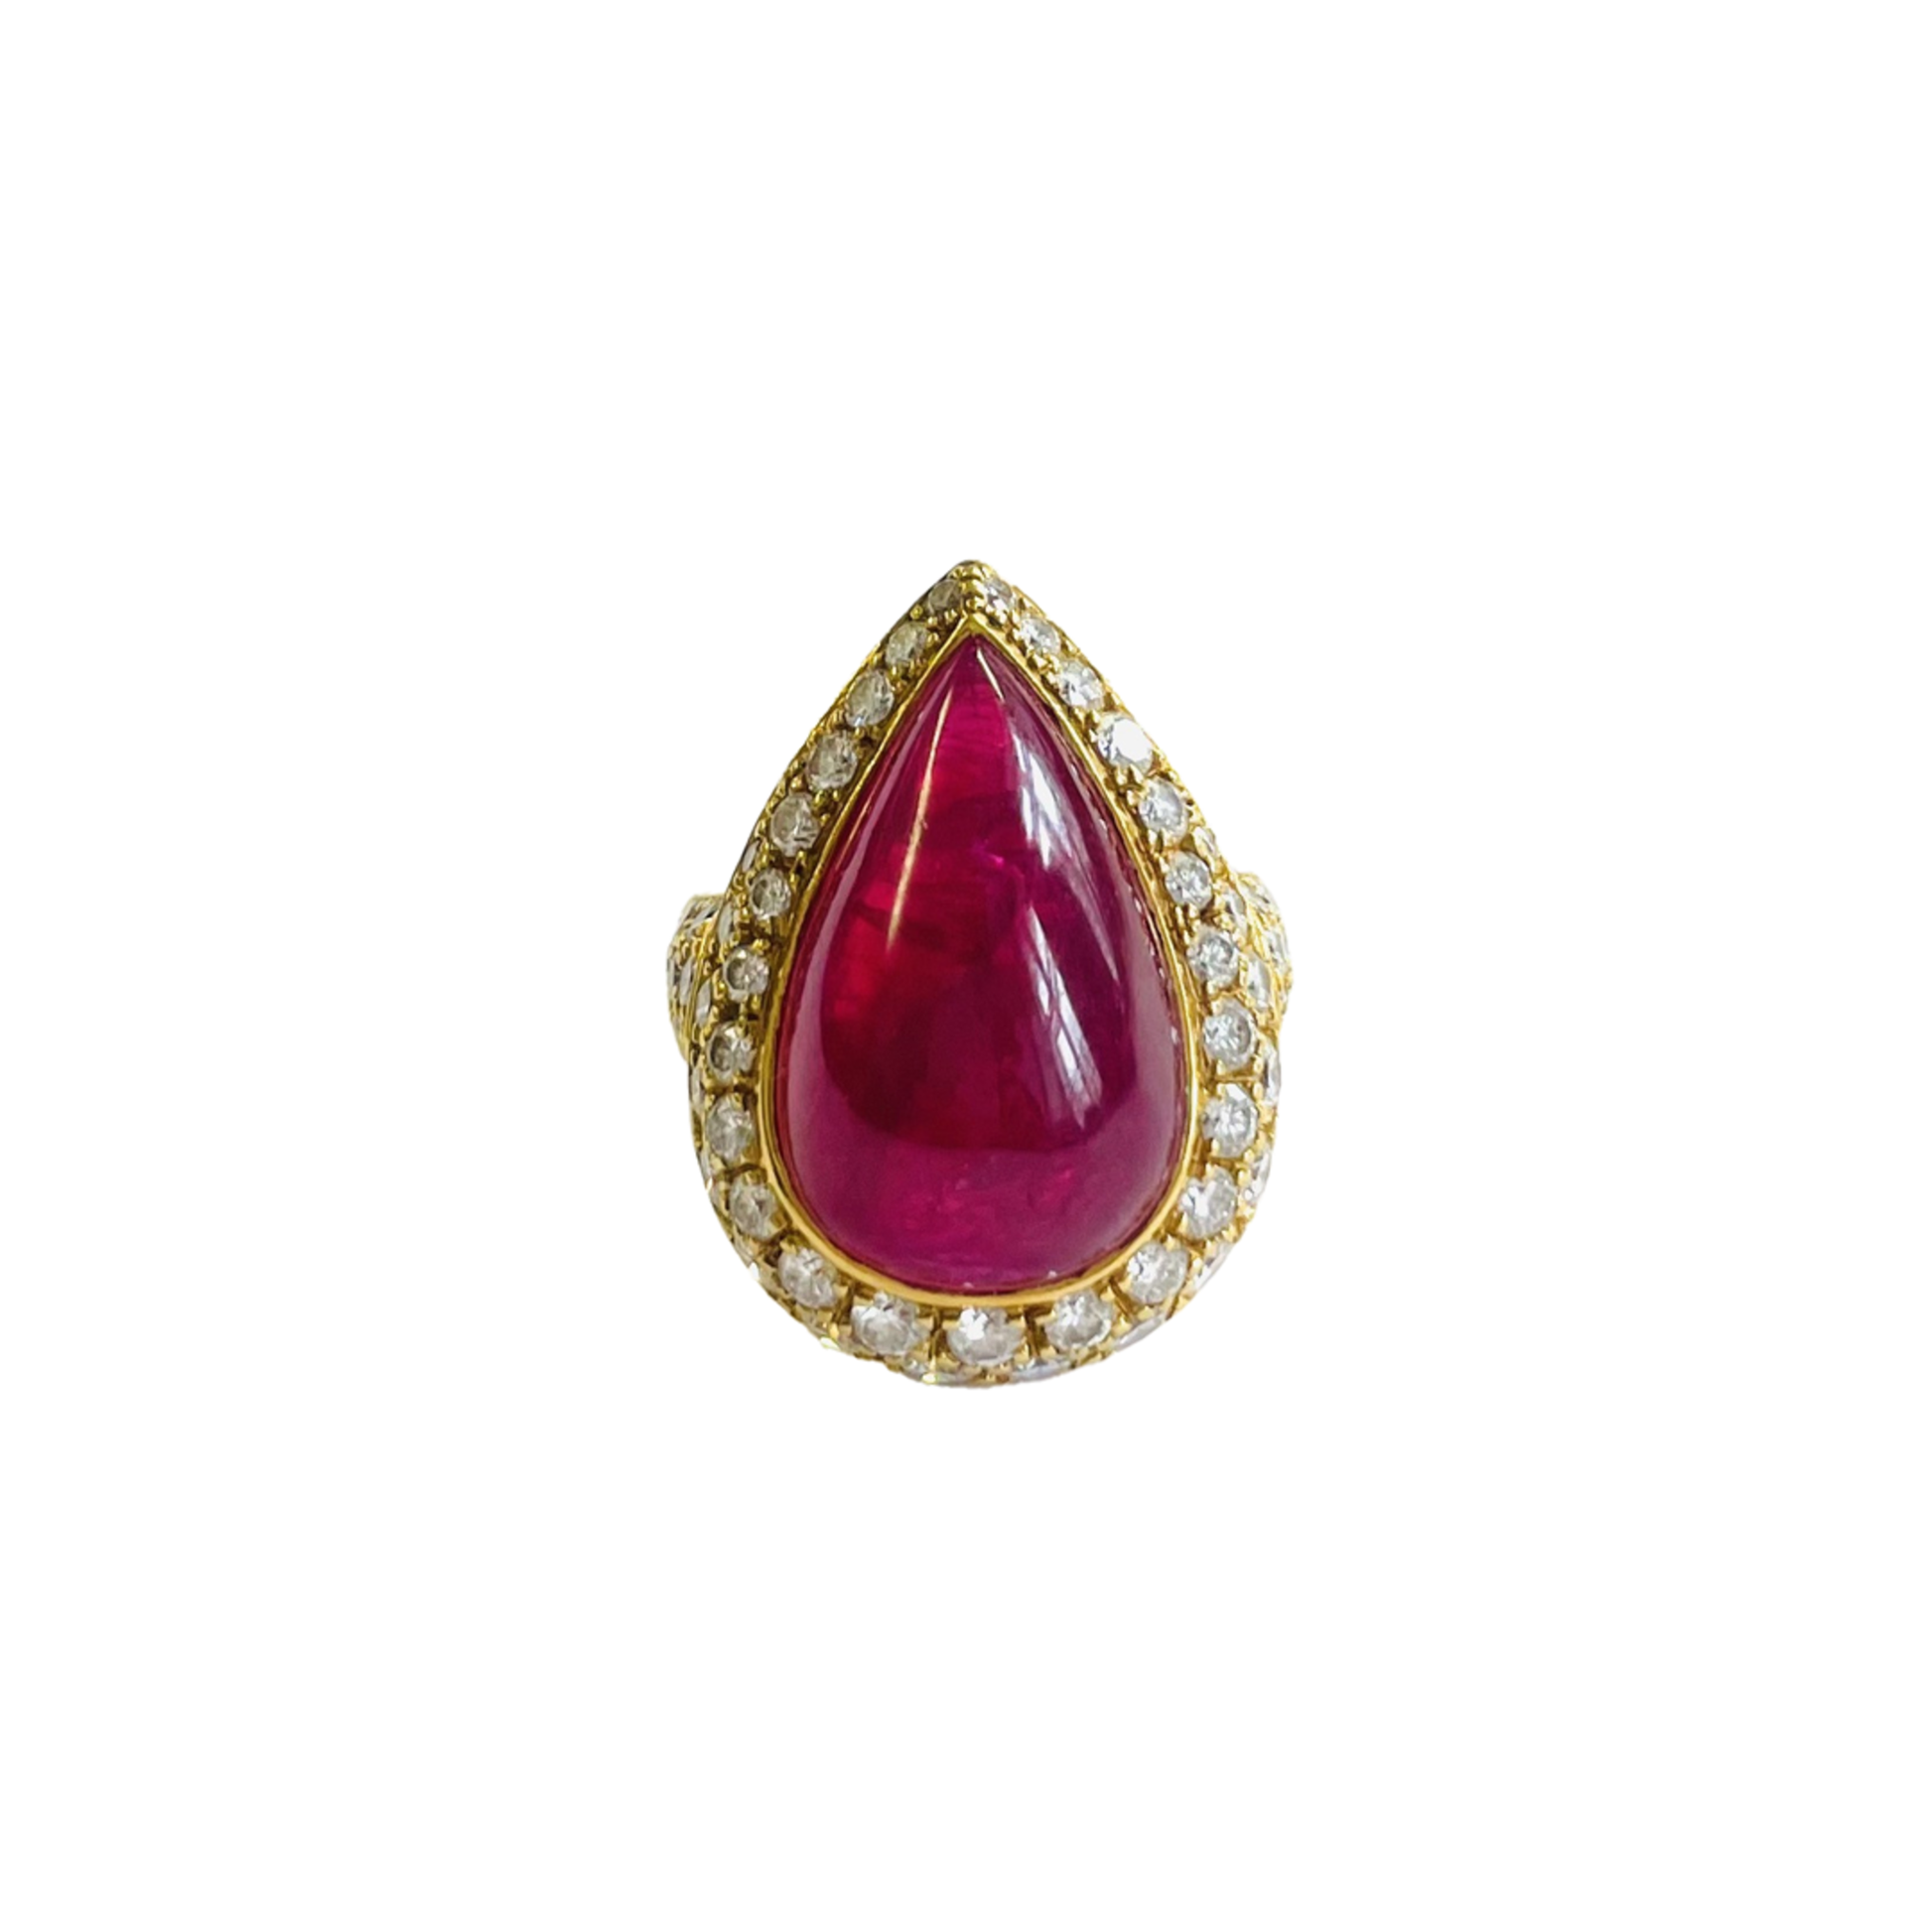 Hemmerle 1980s Platinum & 18KT Yellow Gold African Unheated Ruby & Diamond Ring front